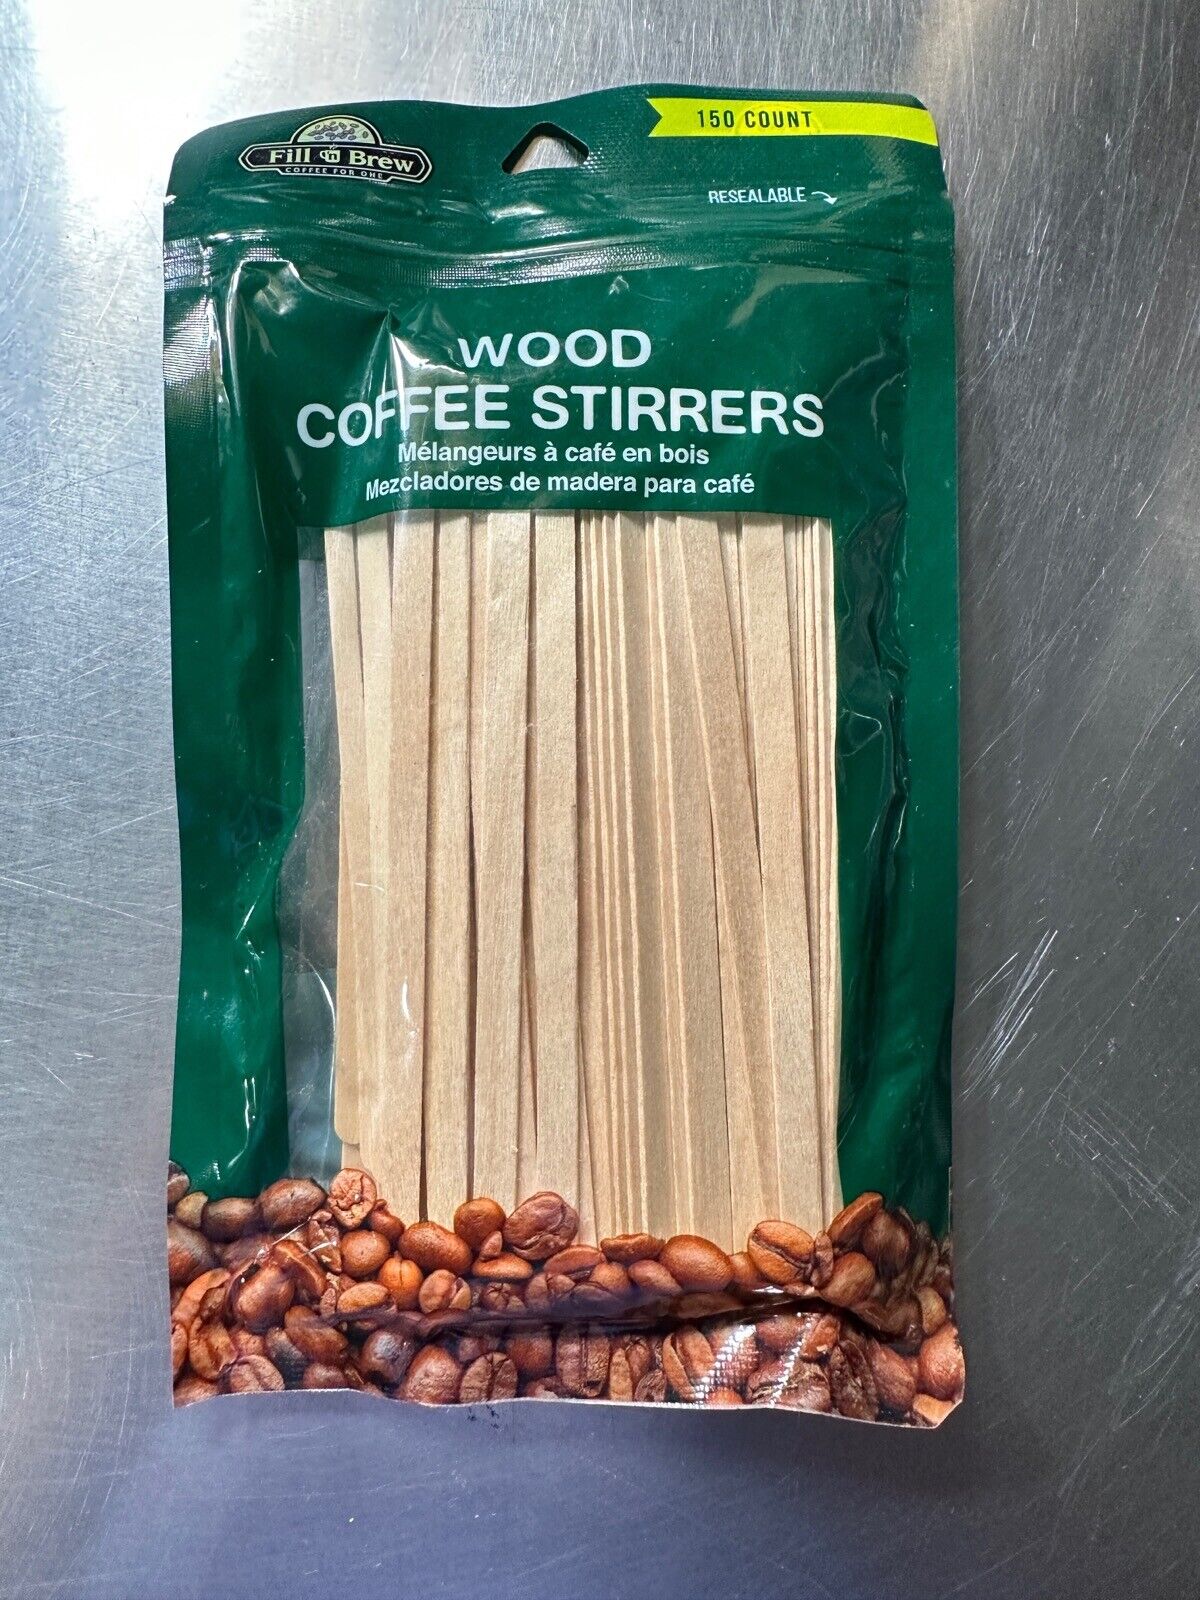 Fill & Brew Wood Coffee Stirrers Disposable 150 Count New In Pack